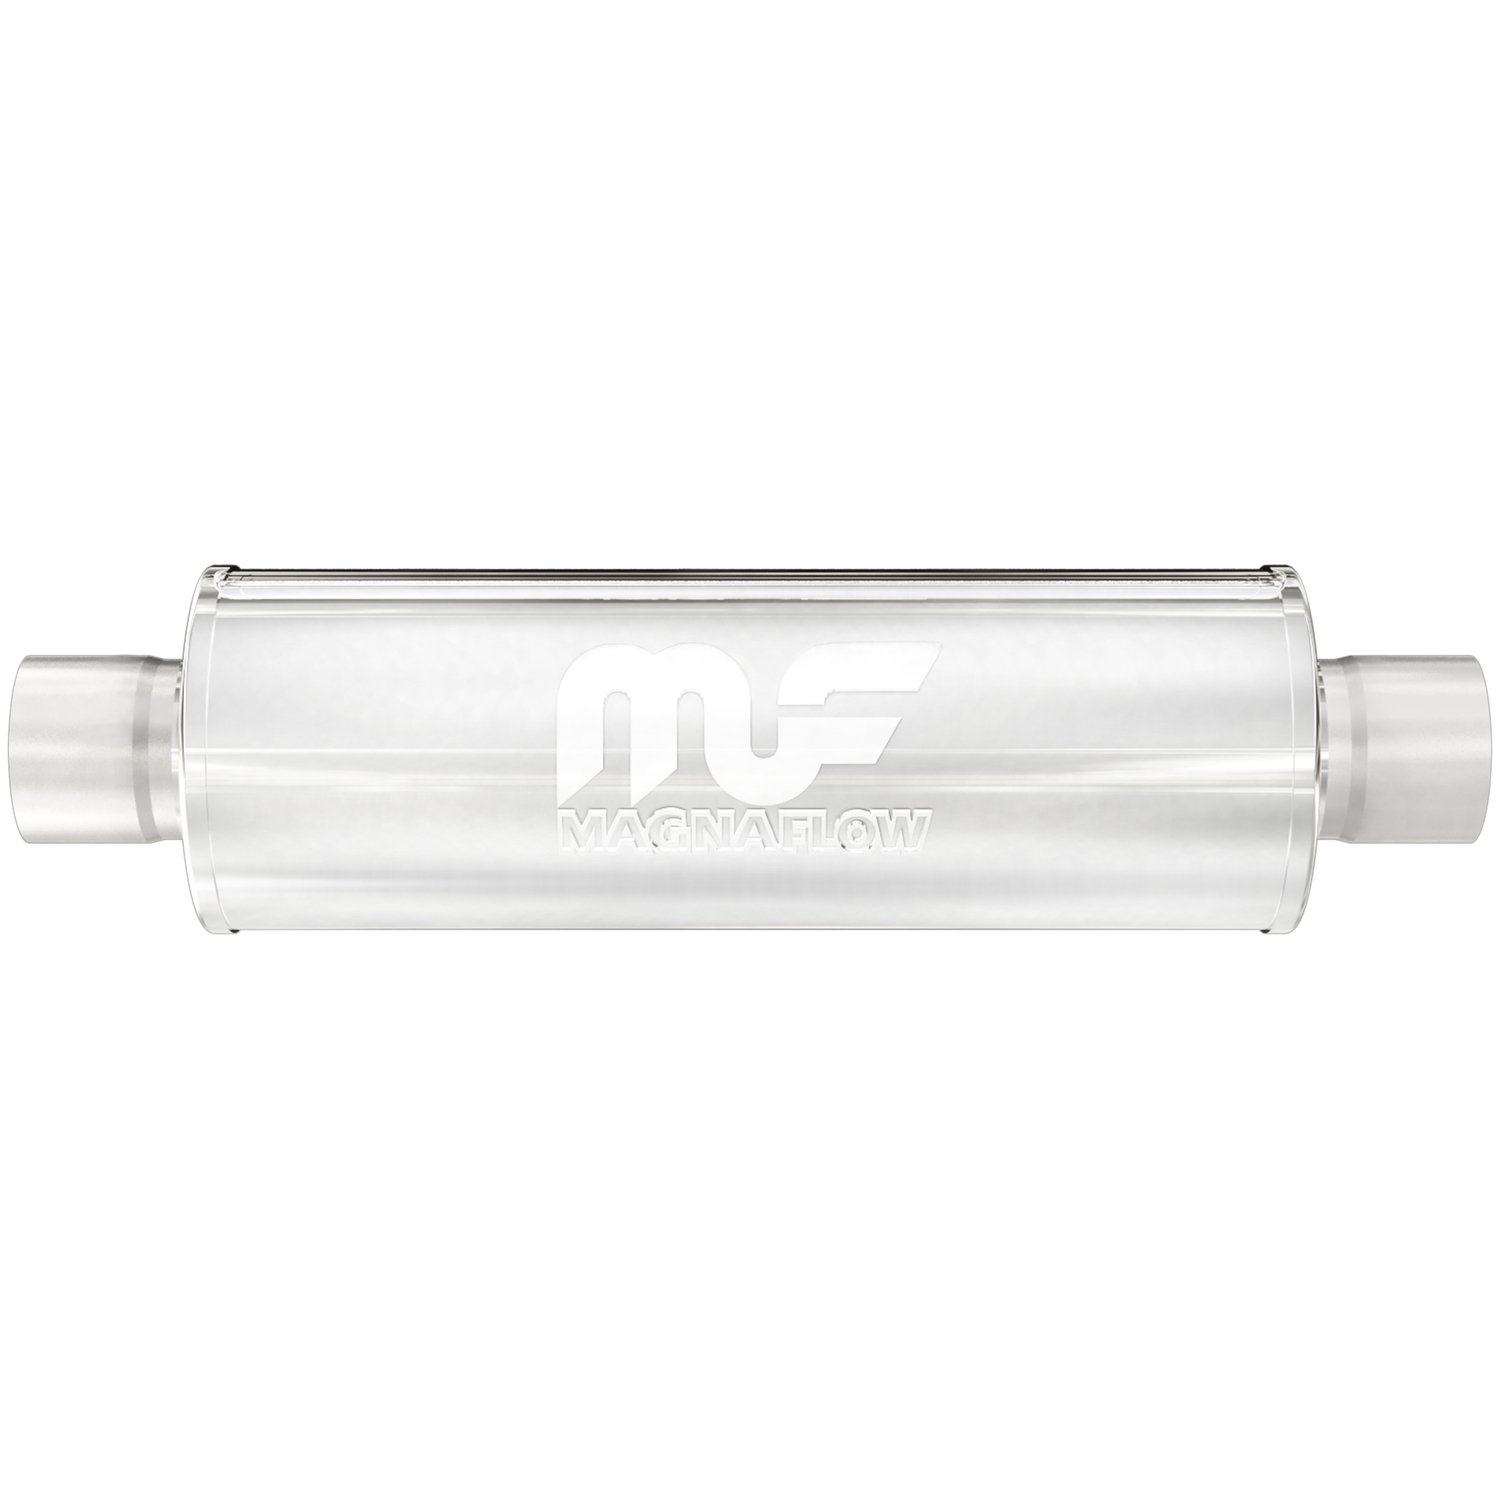 6" Round Muffler Center In/Center Out: 2.25" Body Length: 14" Overall Length: 20" Core Size: 2.5" Satin Finish